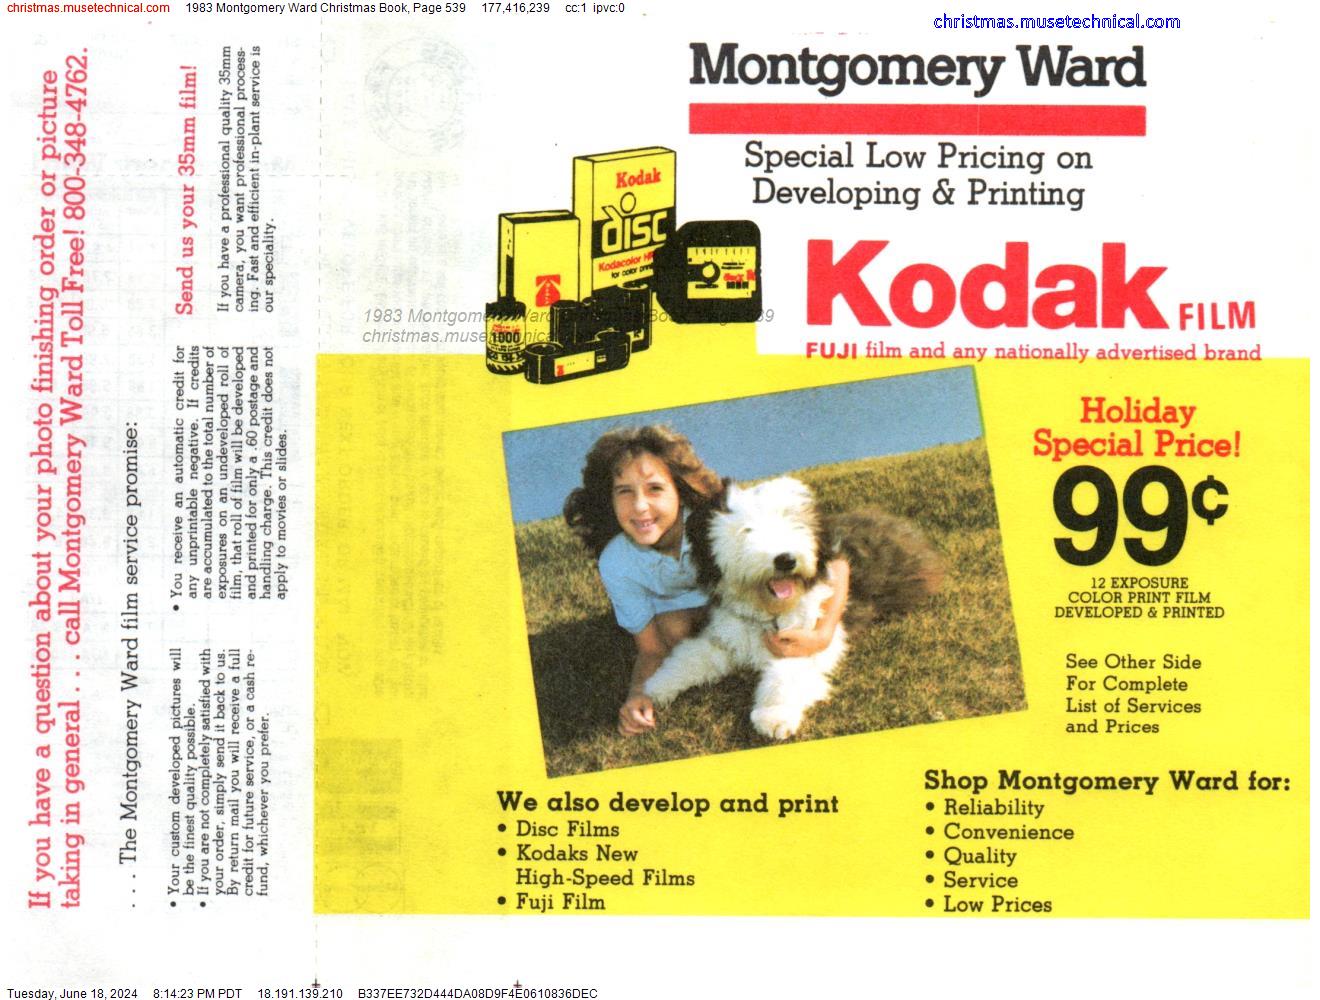 1983 Montgomery Ward Christmas Book, Page 539